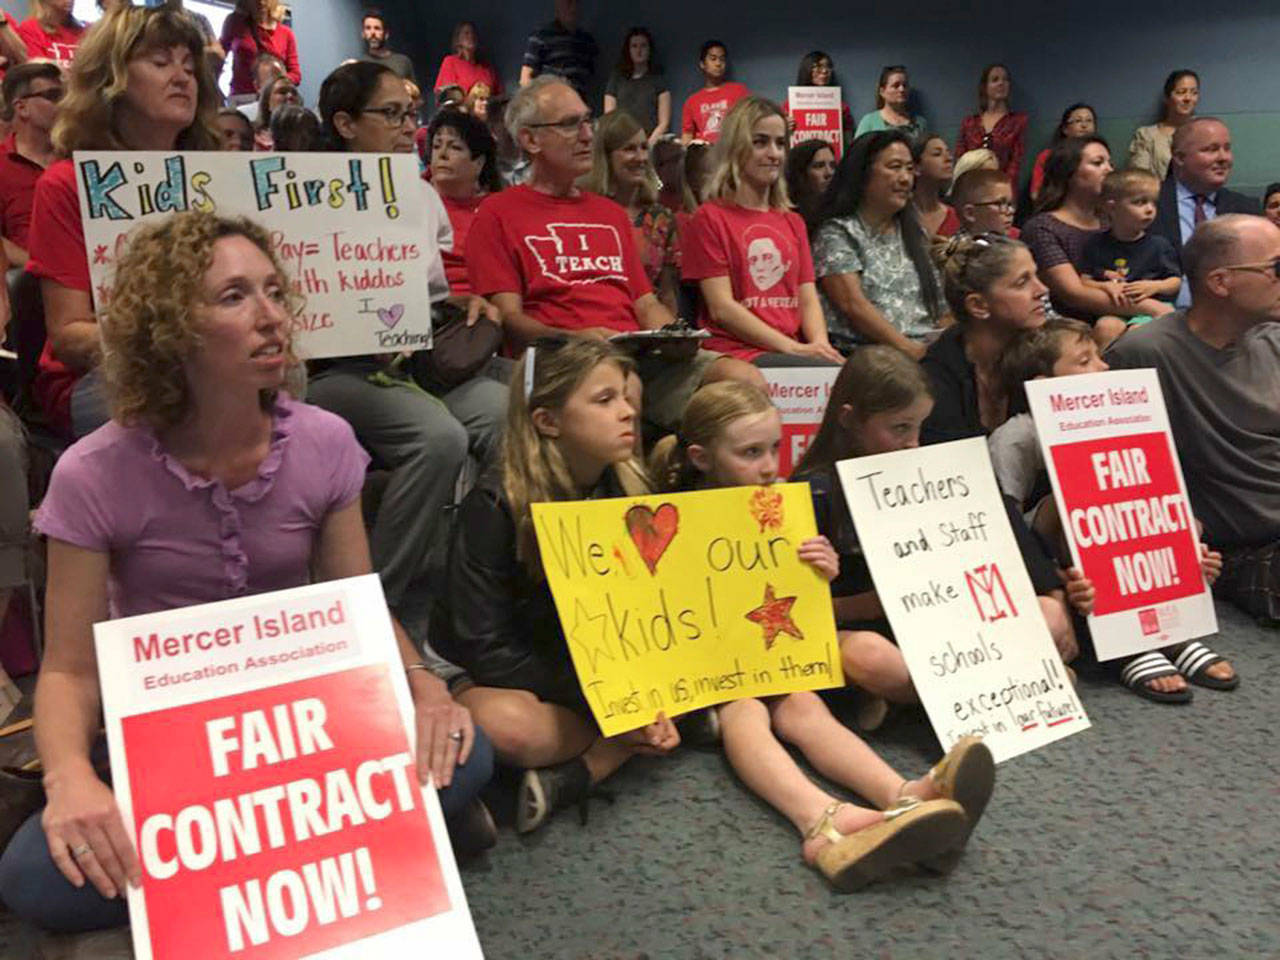 Mercer Island Education Association (MIEA) members and supporters pack the School Board meeting on Aug. 17, after holding a rally outside City Hall. Photo courtesy of MIEA